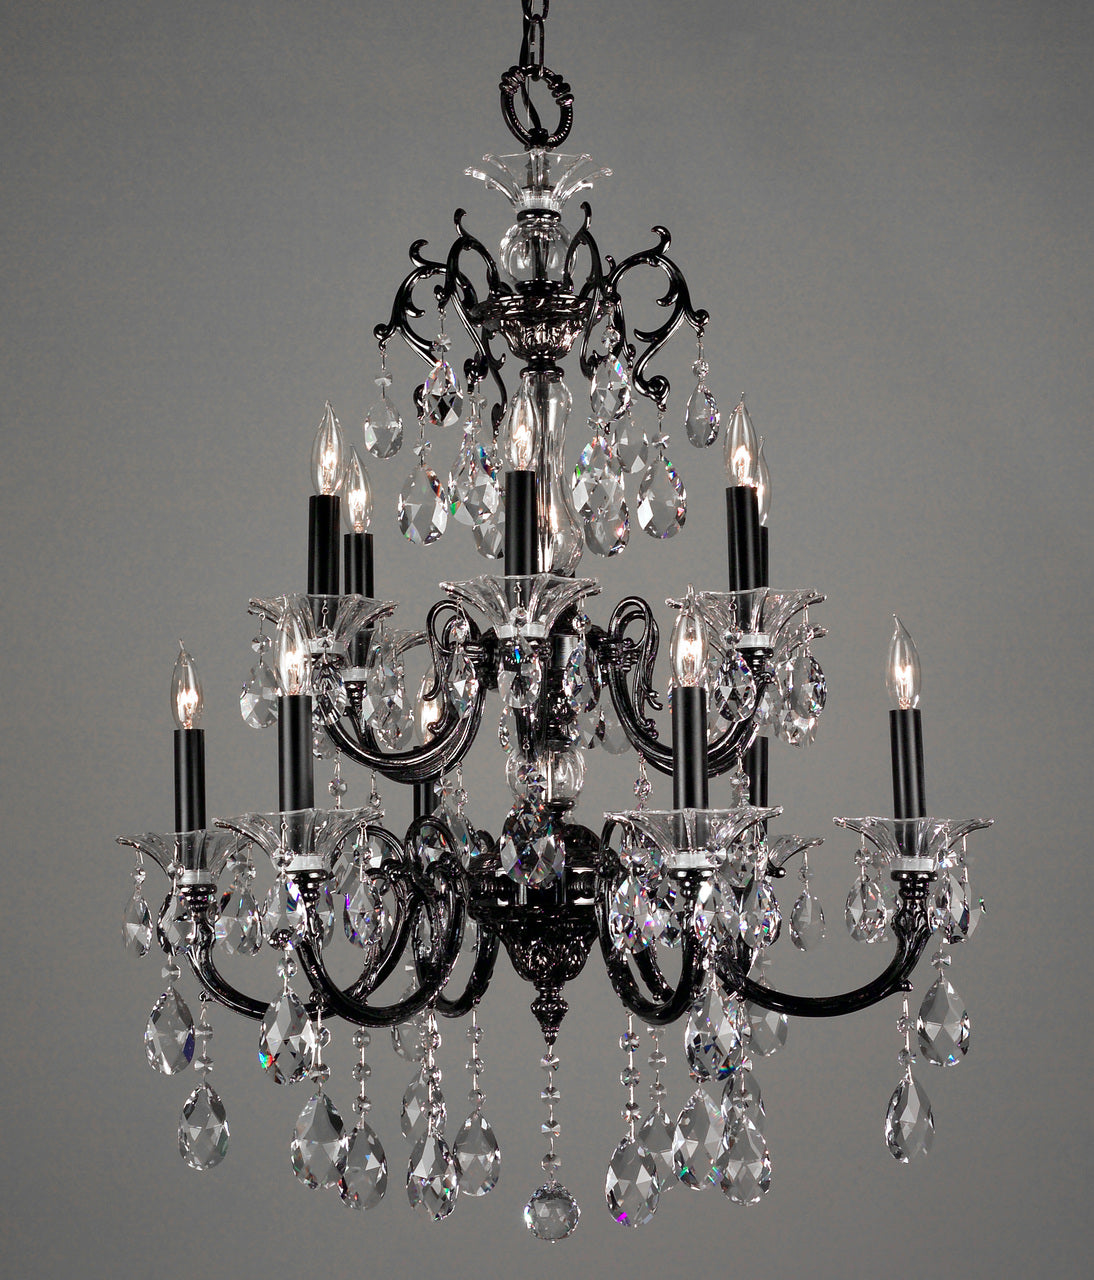 Classic Lighting 57062 EP SC Via Lombardi Crystal Chandelier in Ebony Pearl (Imported from Spain)